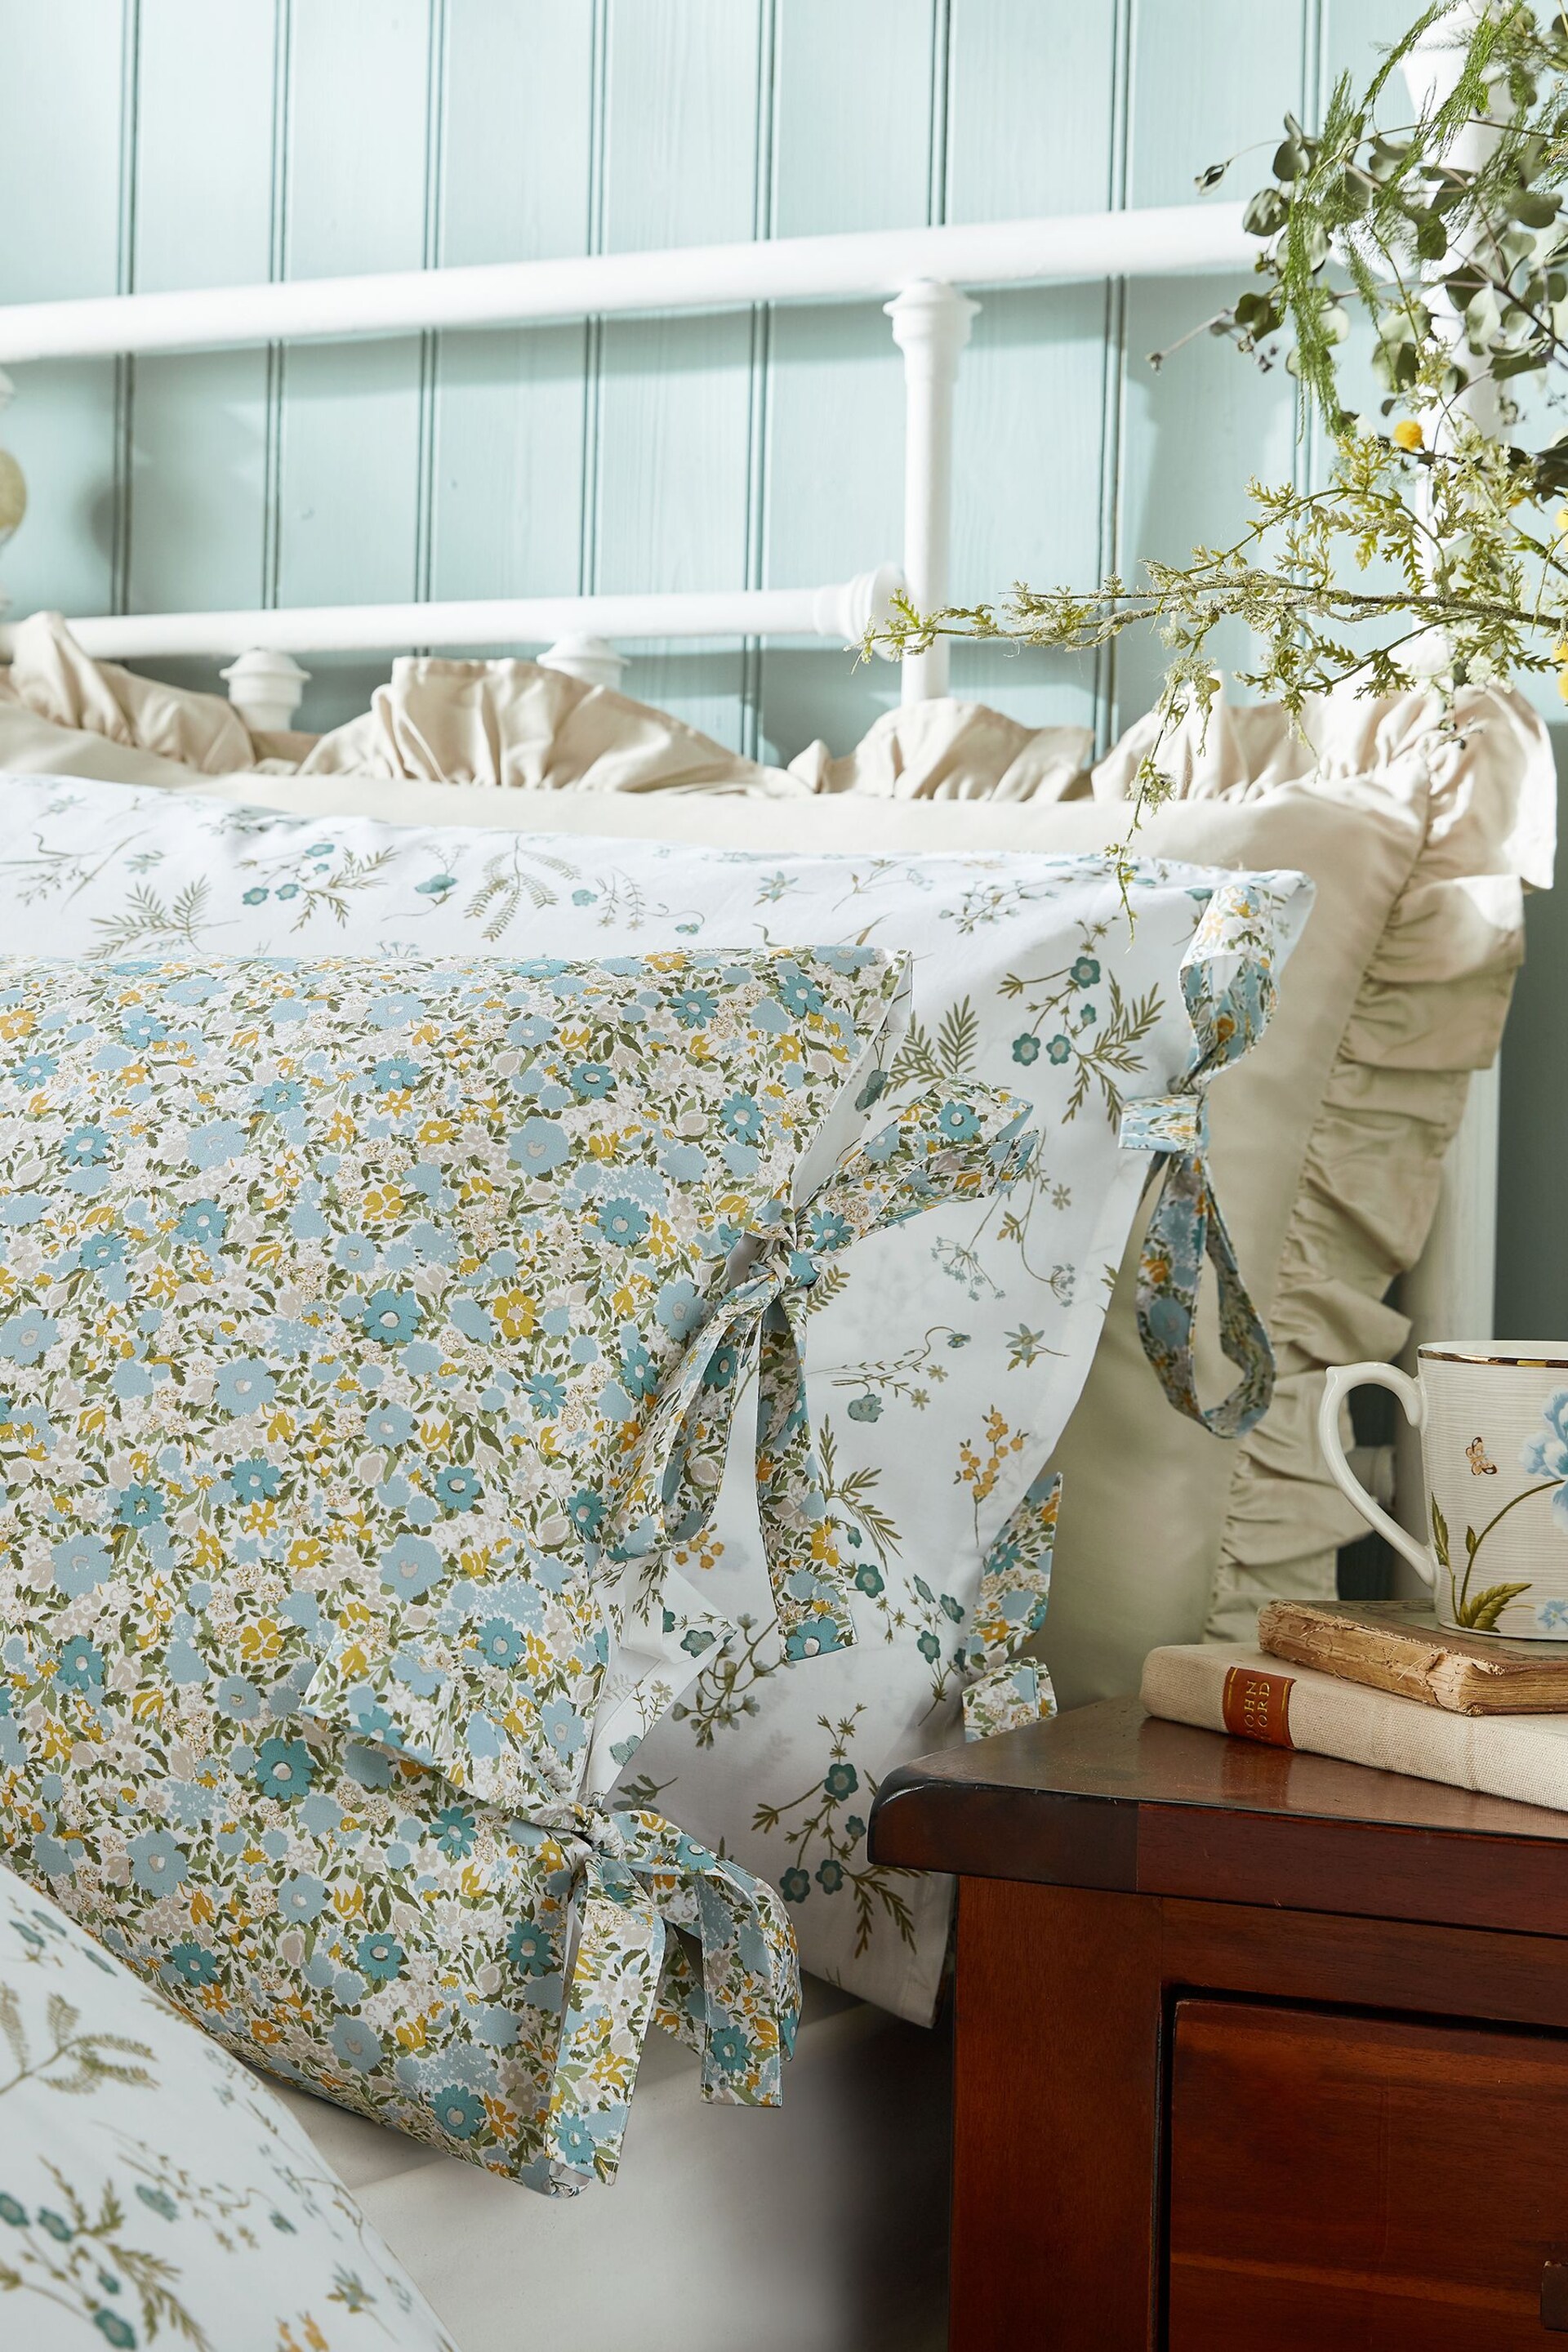 Laura Ashley Newport Blue 200 Thread Count Loveston Duvet Cover and Pillowcase Set - Image 4 of 7